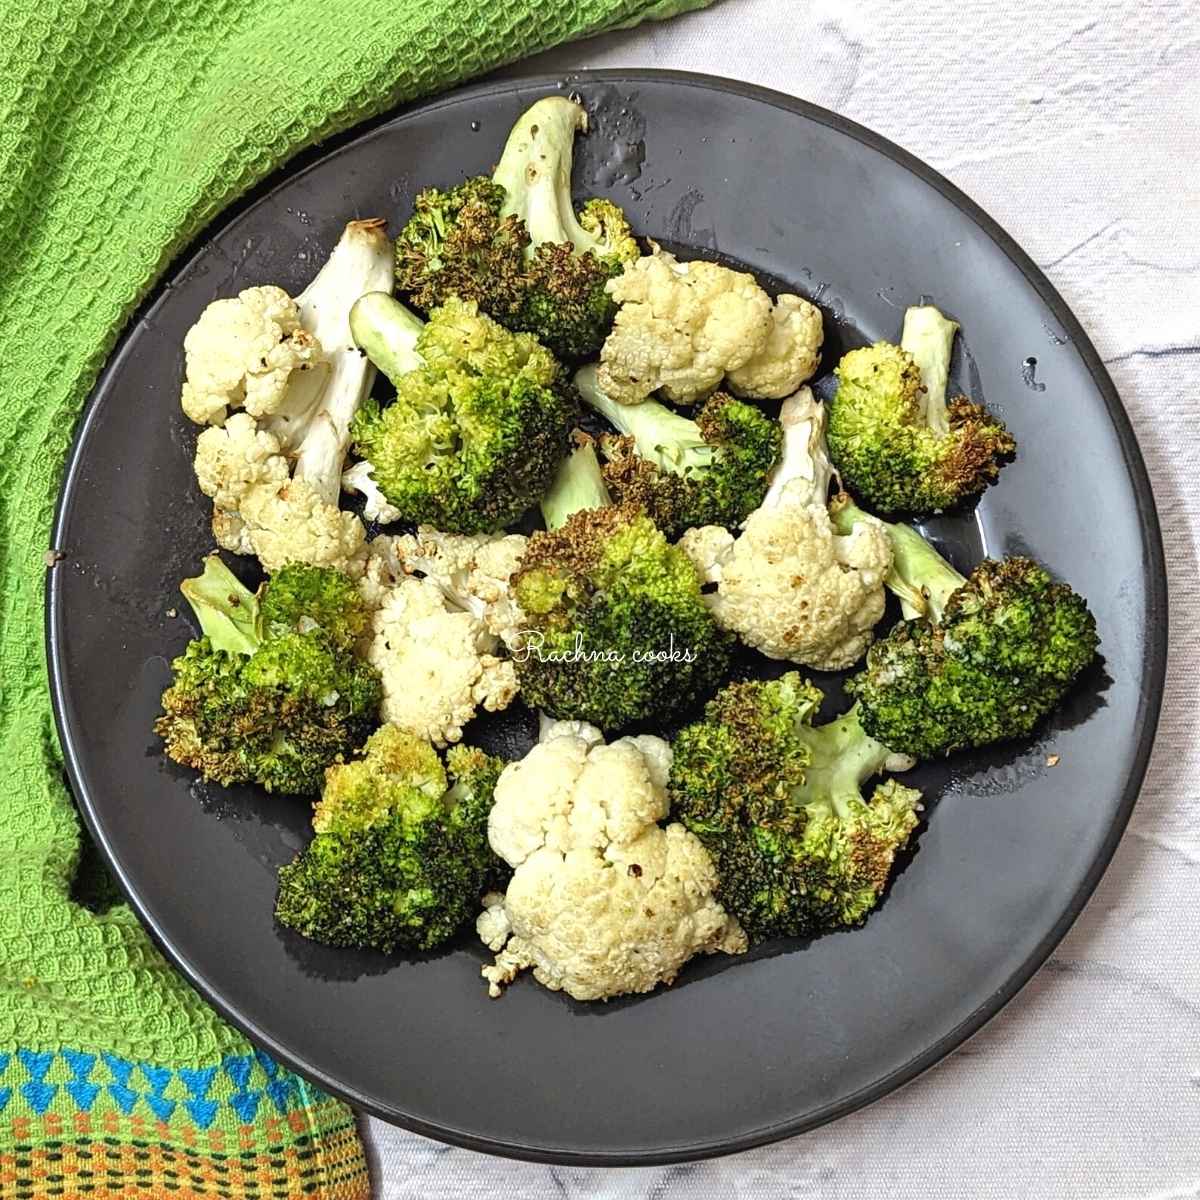 Charred air fried broccoli and cauliflower florets served on a black plate.